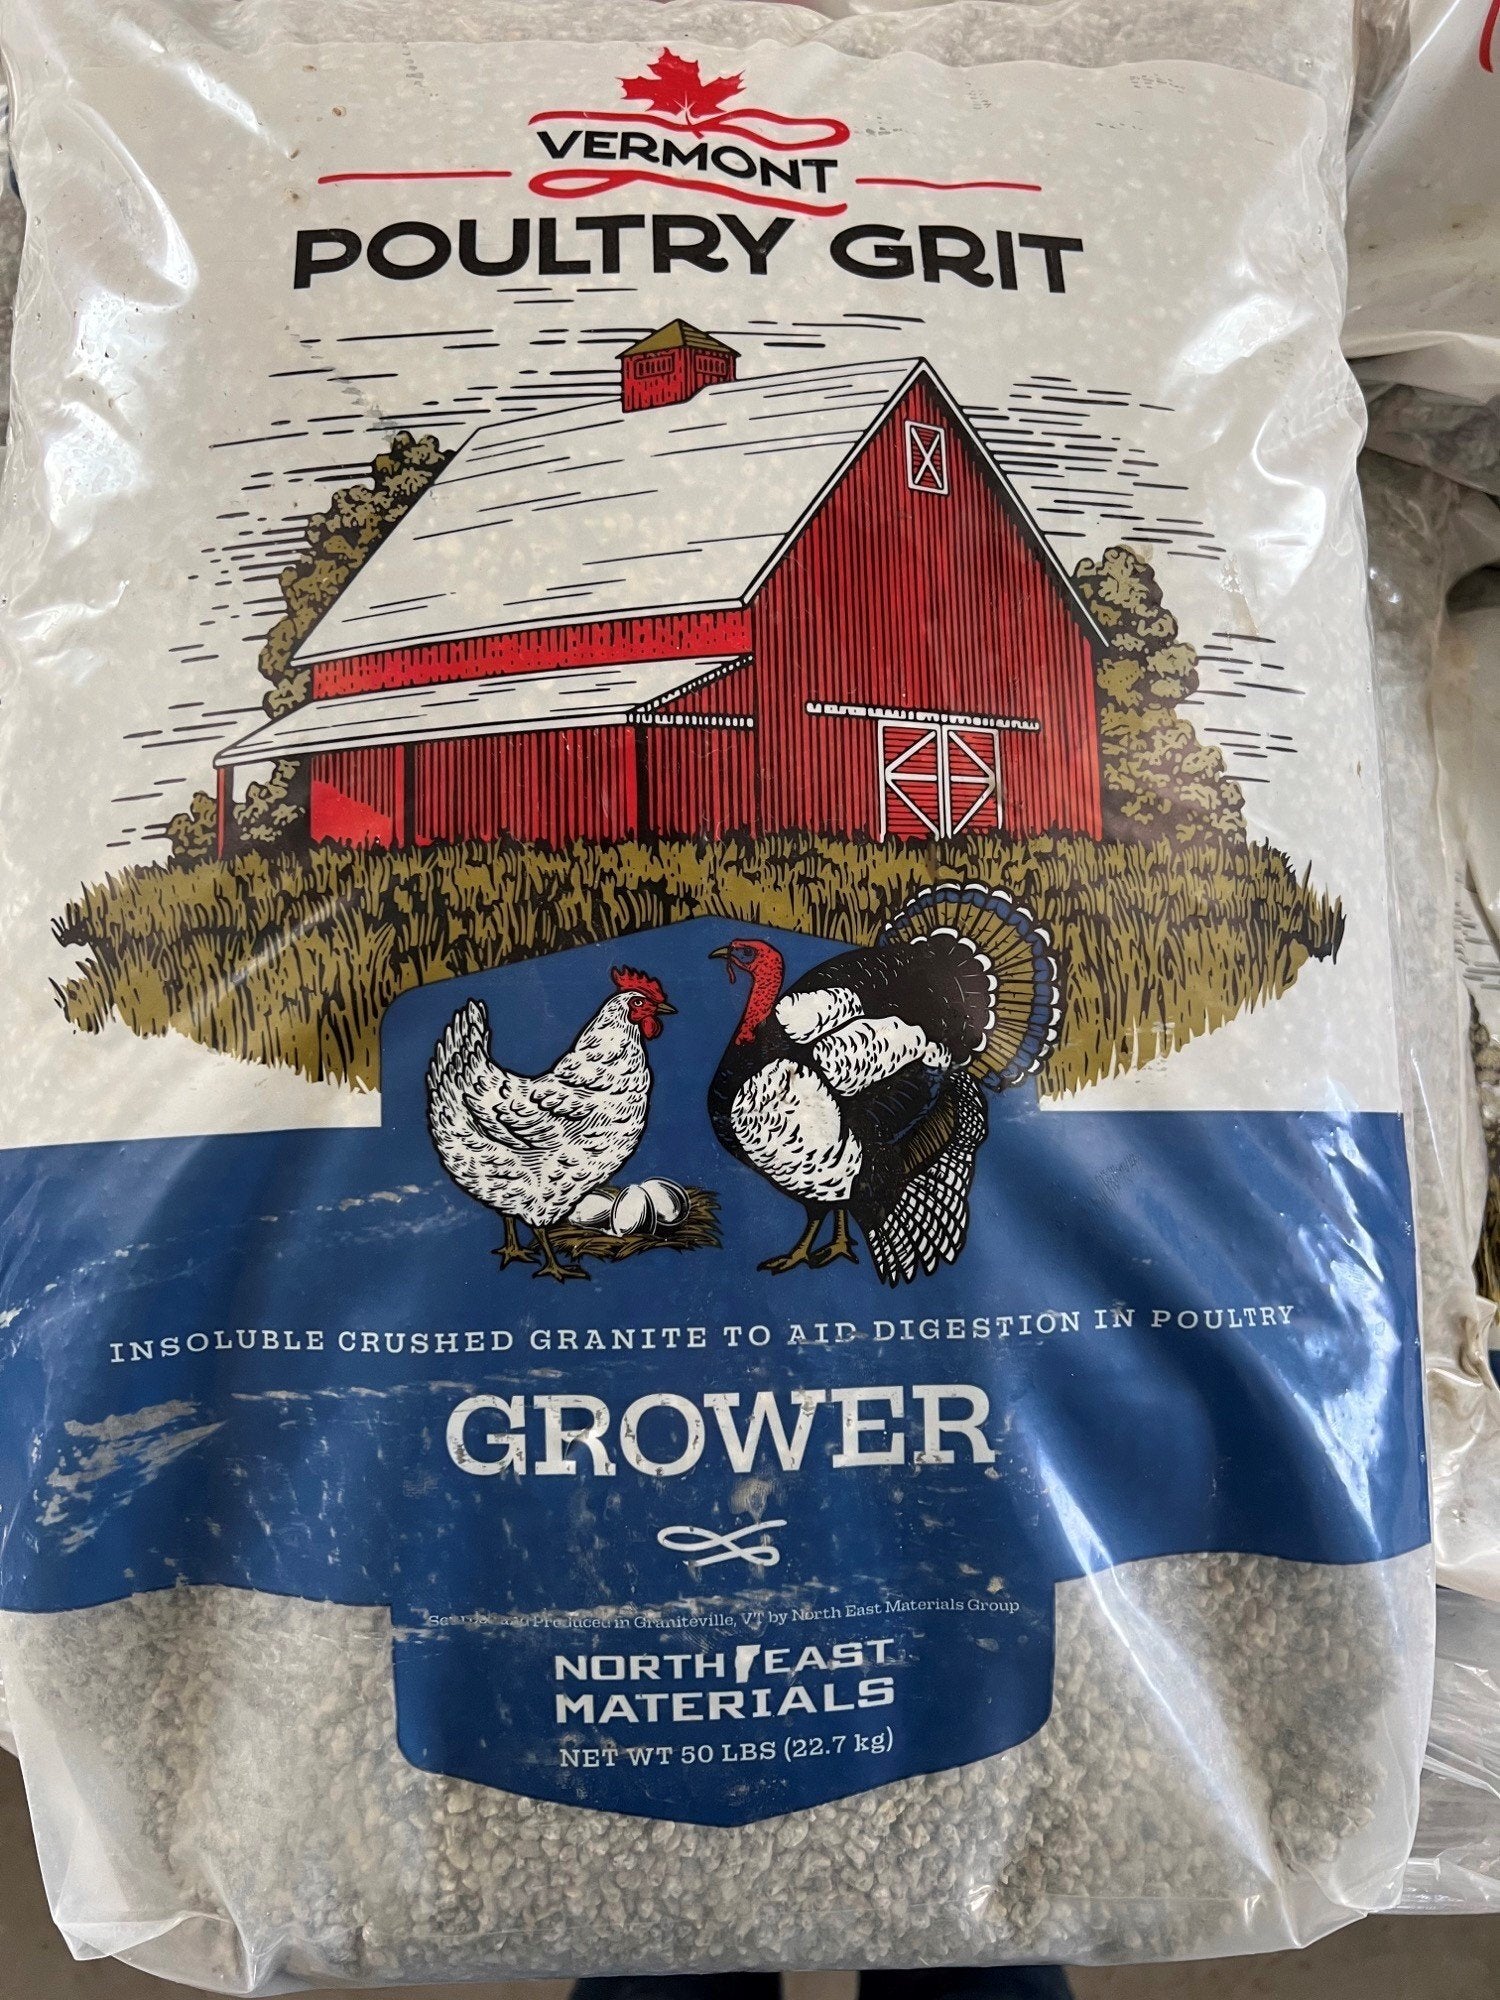 Vermont Poultry Grit - Grower